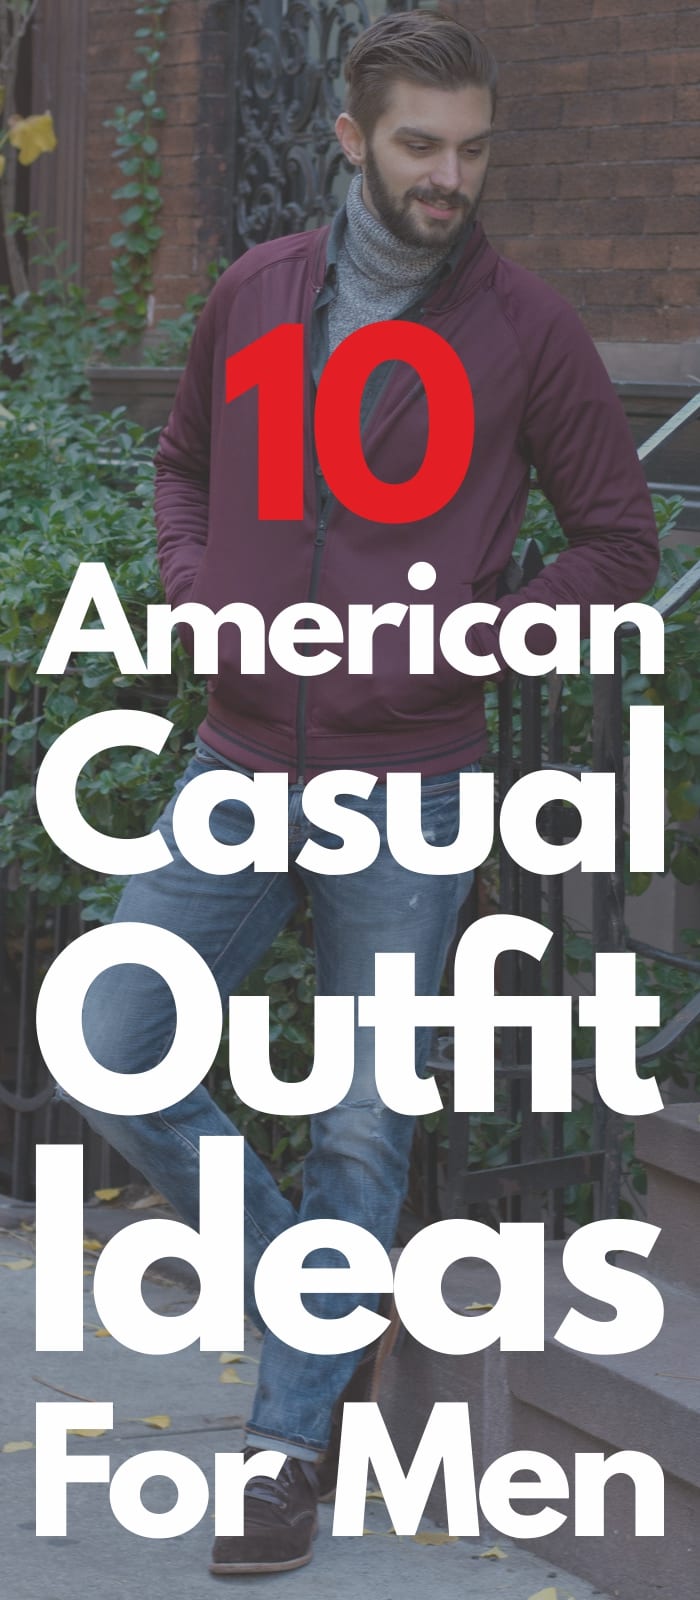 10 American Casual Outfit Ideas For Men